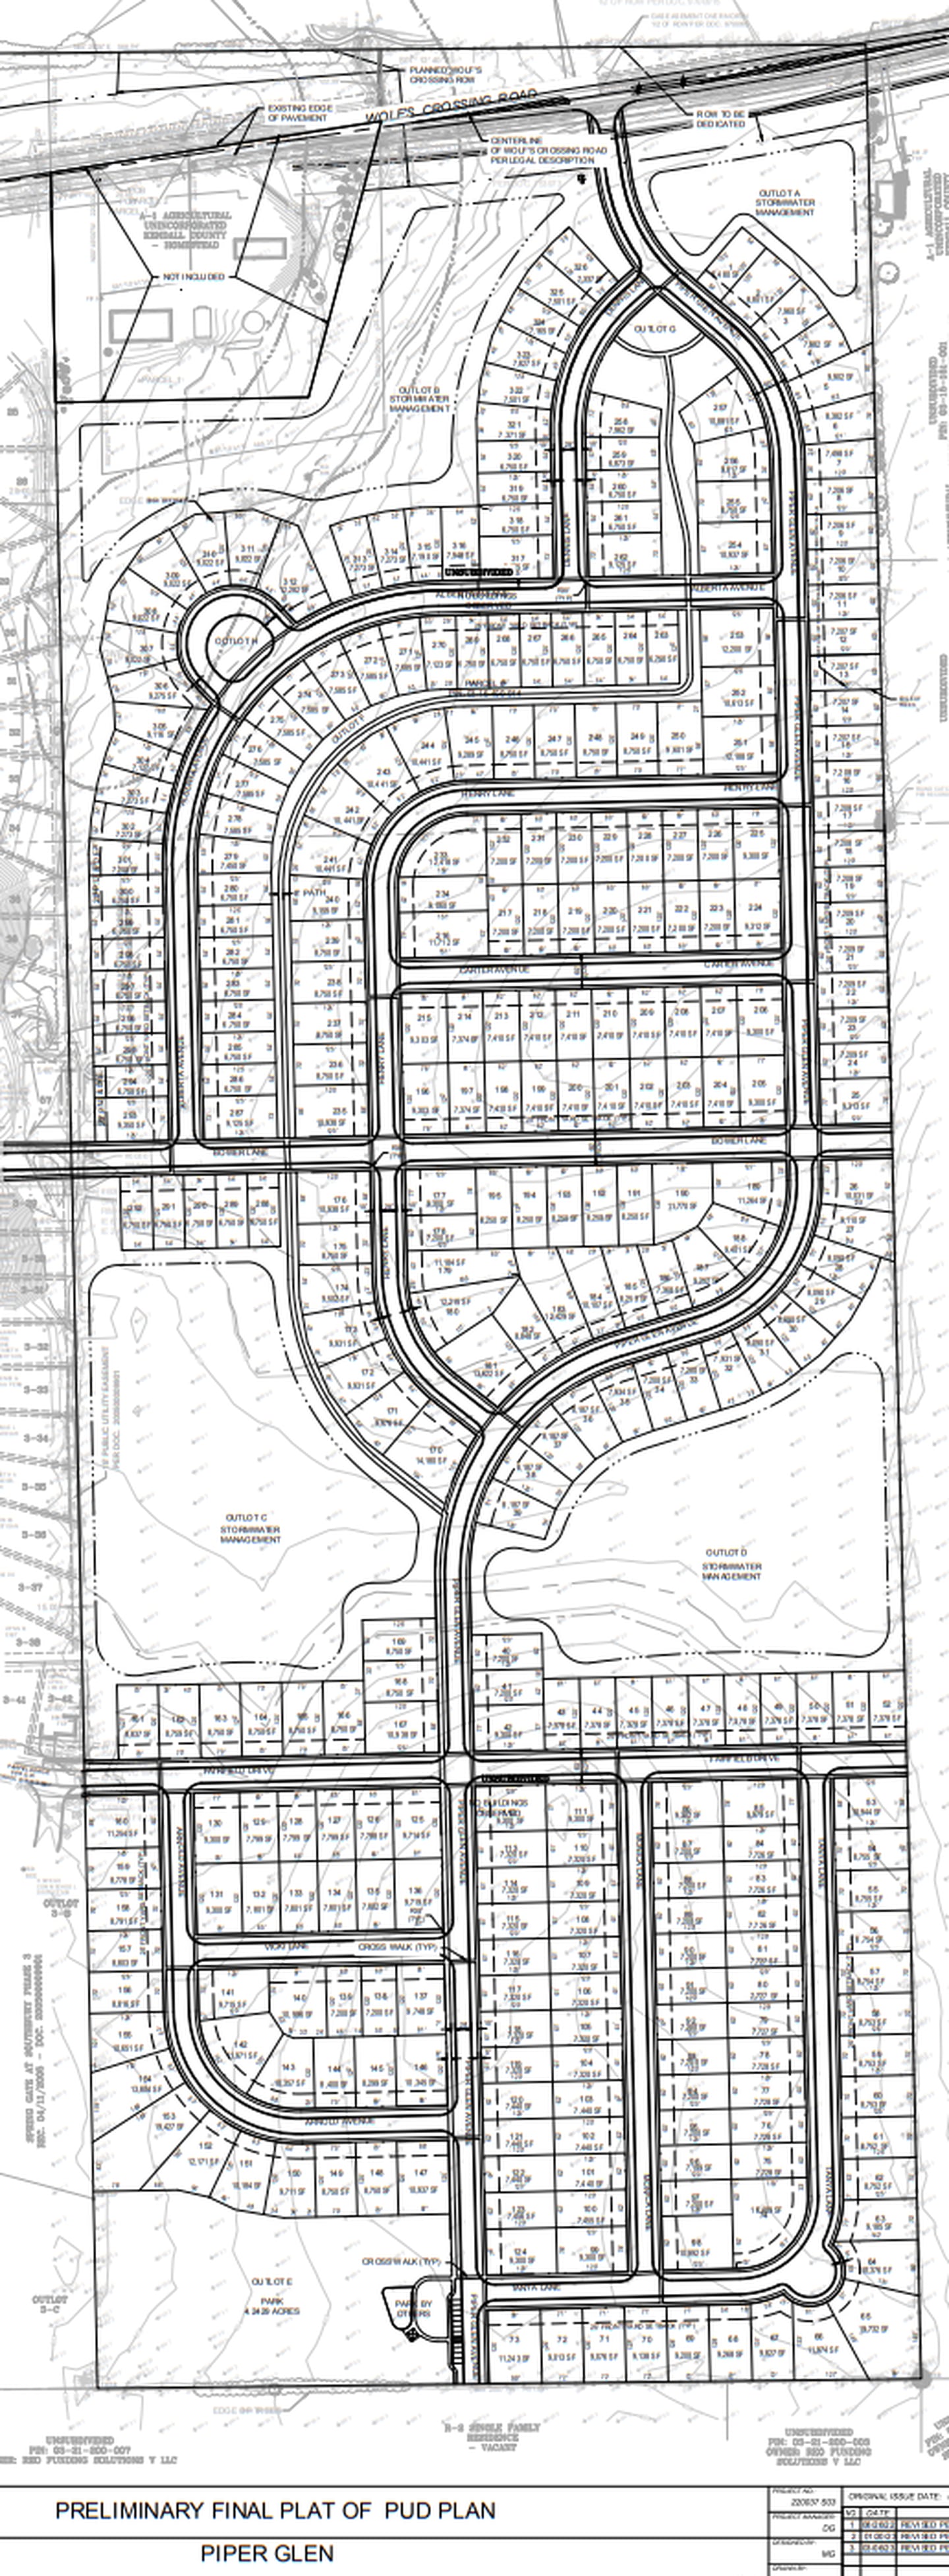 Site map of the proposed Piper Glen Subdivision in Oswego from developer M/I Homes.